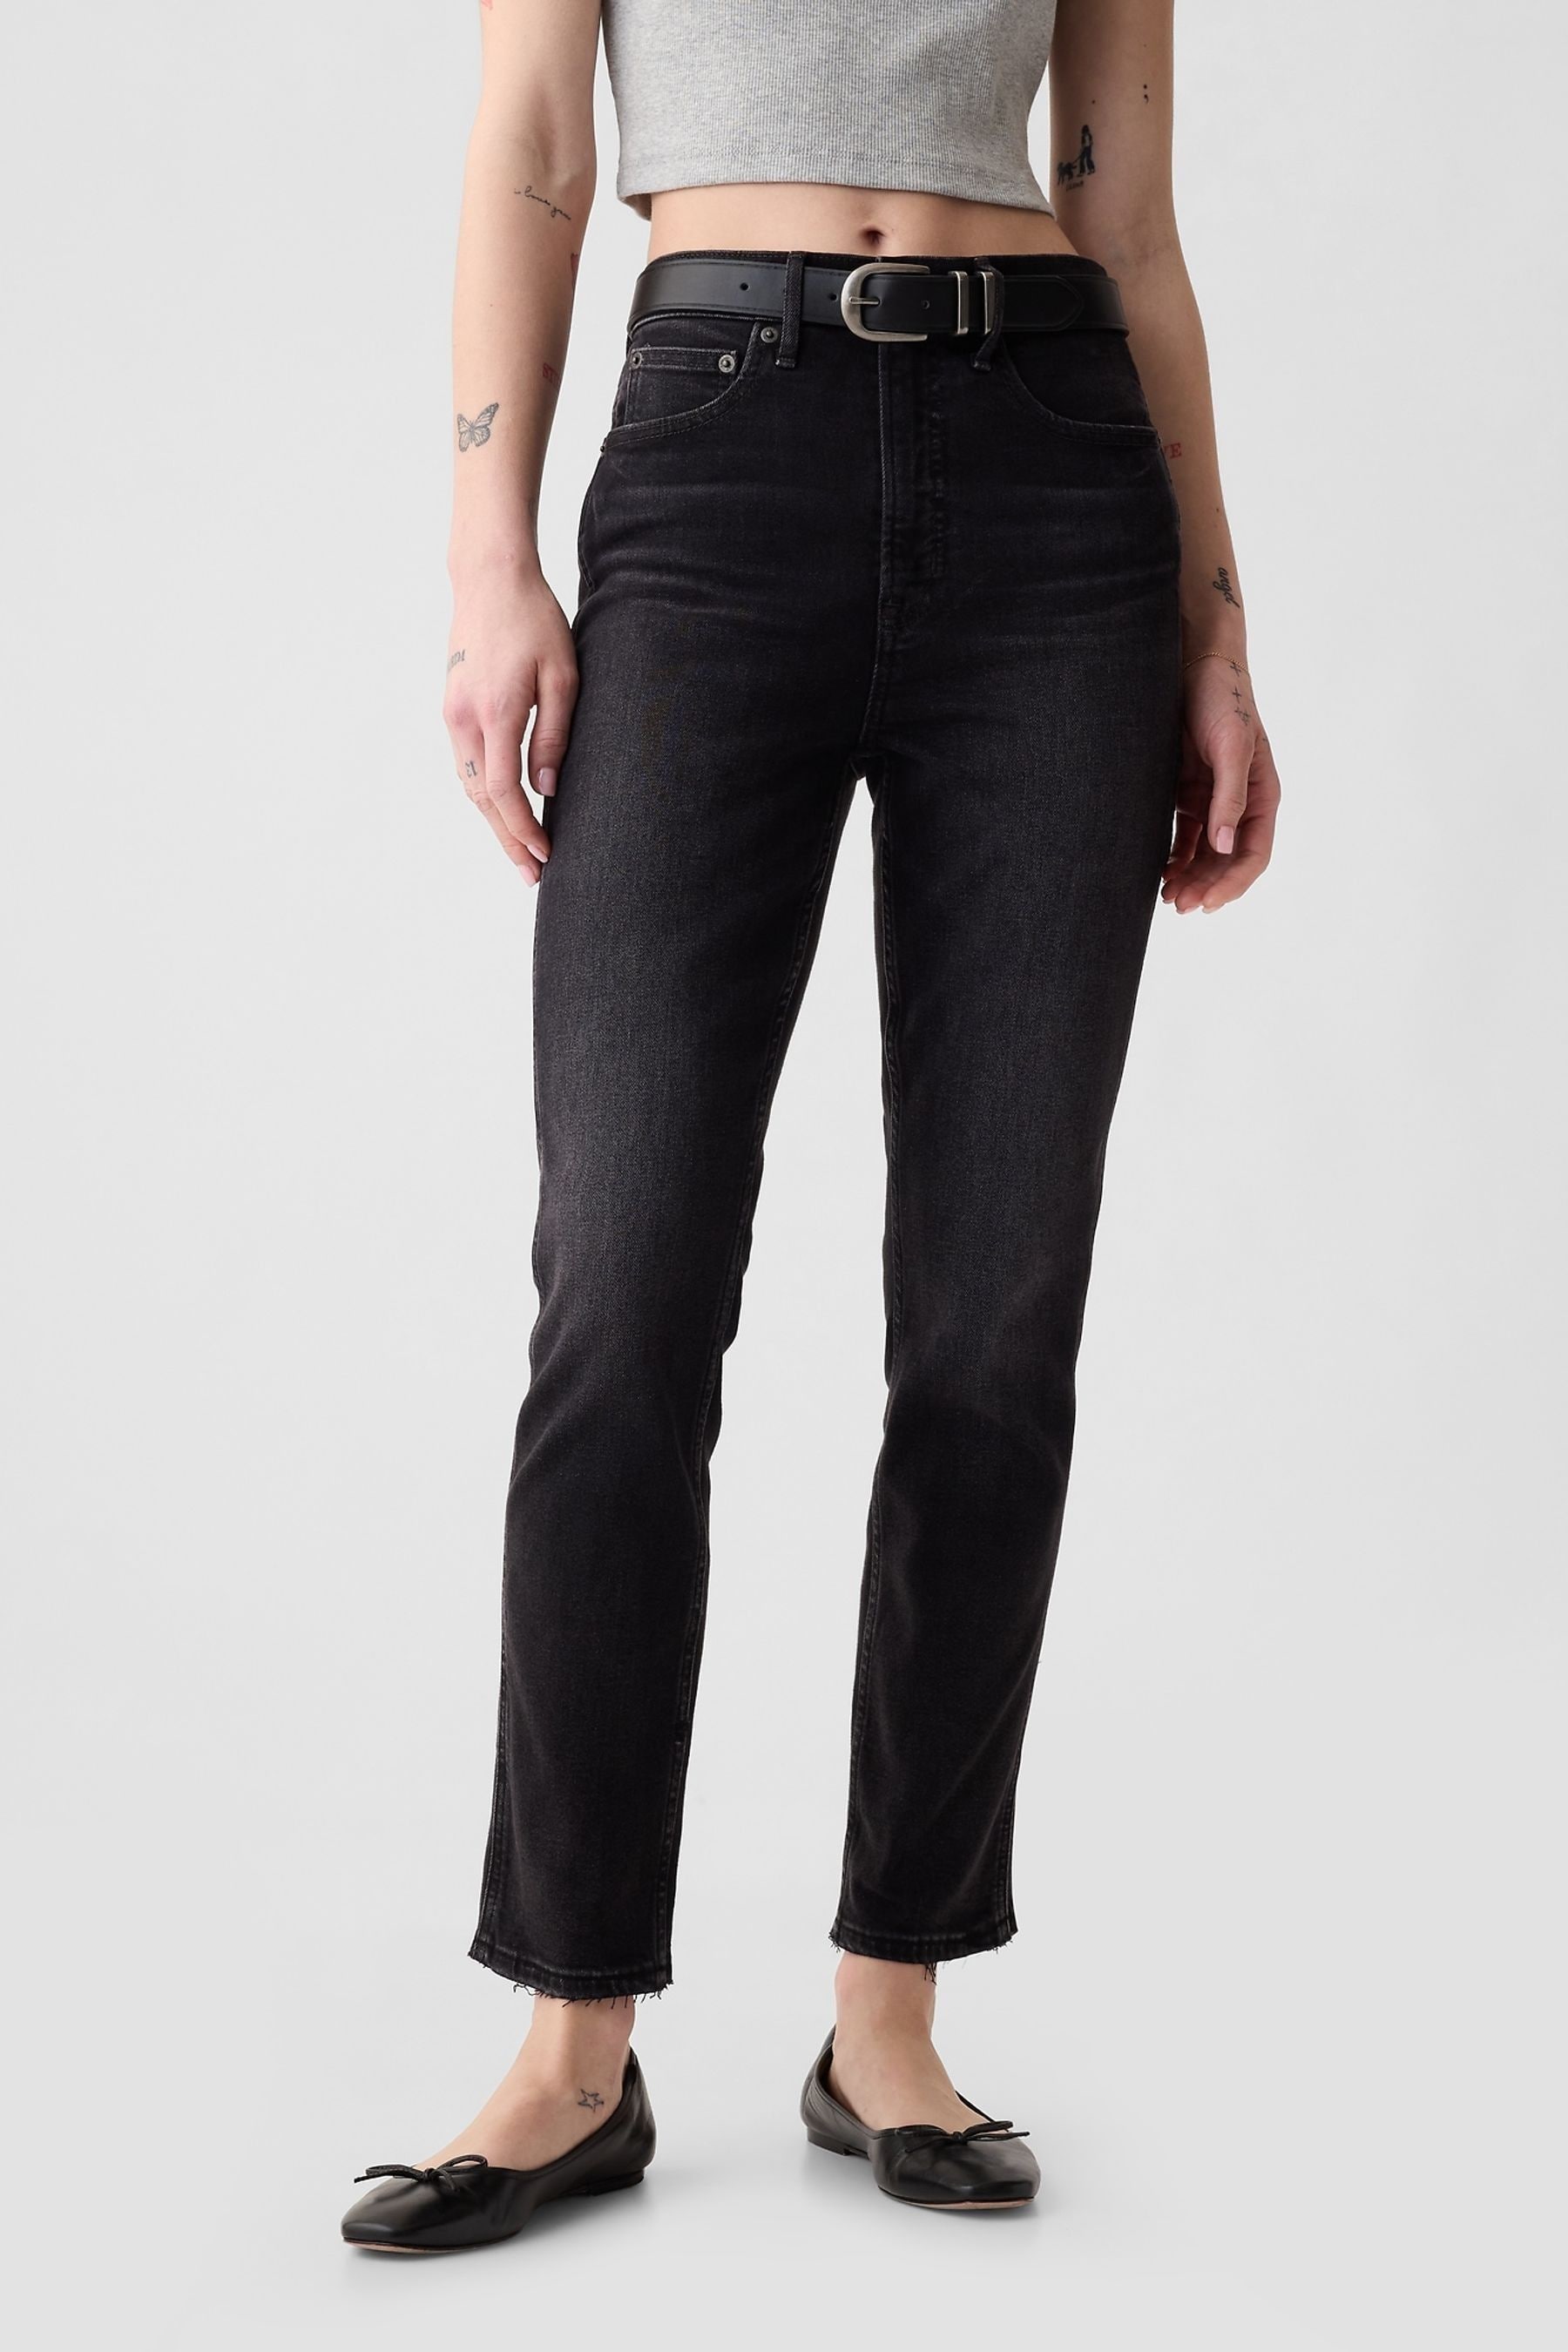 Buy Gap Black Vintage Slim Stretch High Waisted Jeans from the Next UK ...